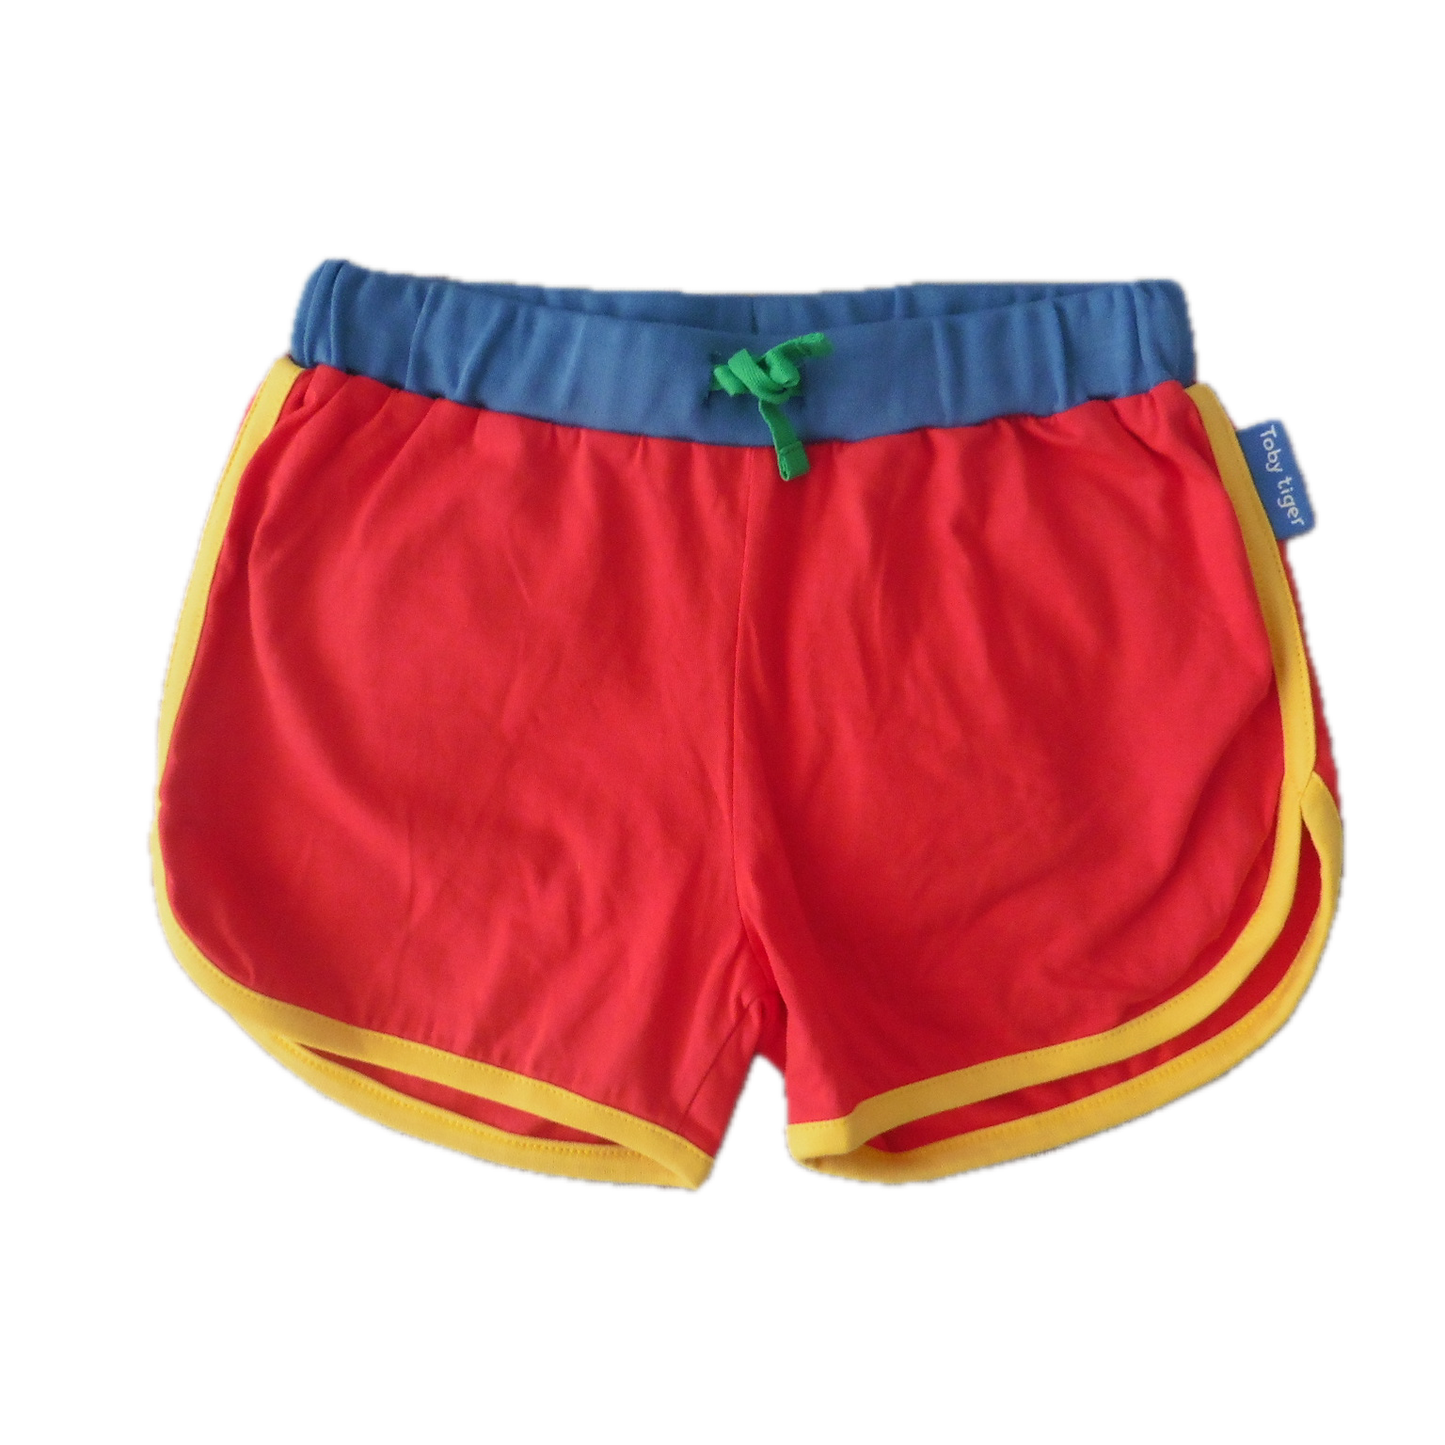 New Toby Tiger red runner shorts 5-6y